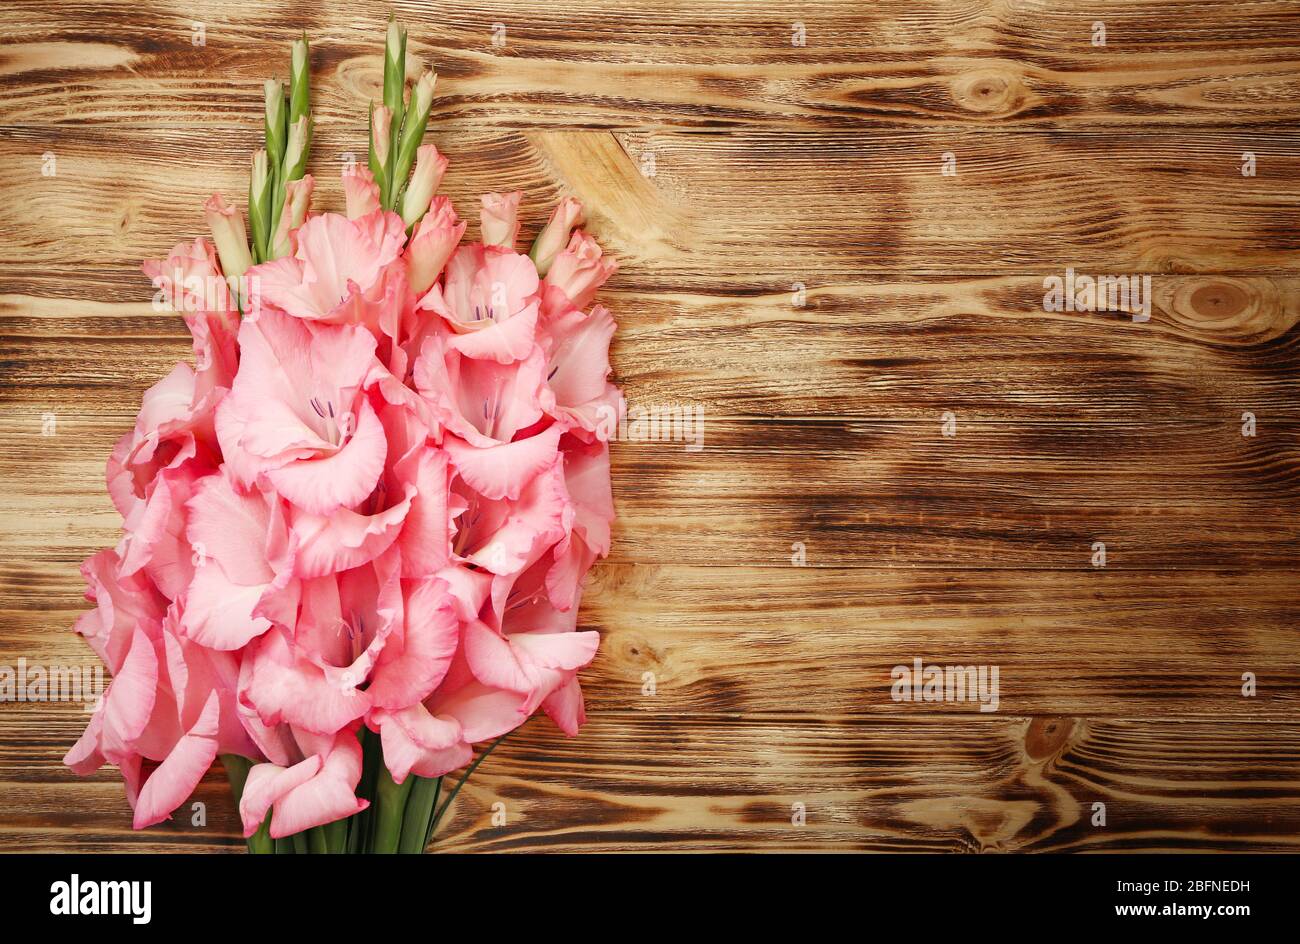 Beautiful flowers on wooden background Stock Photo